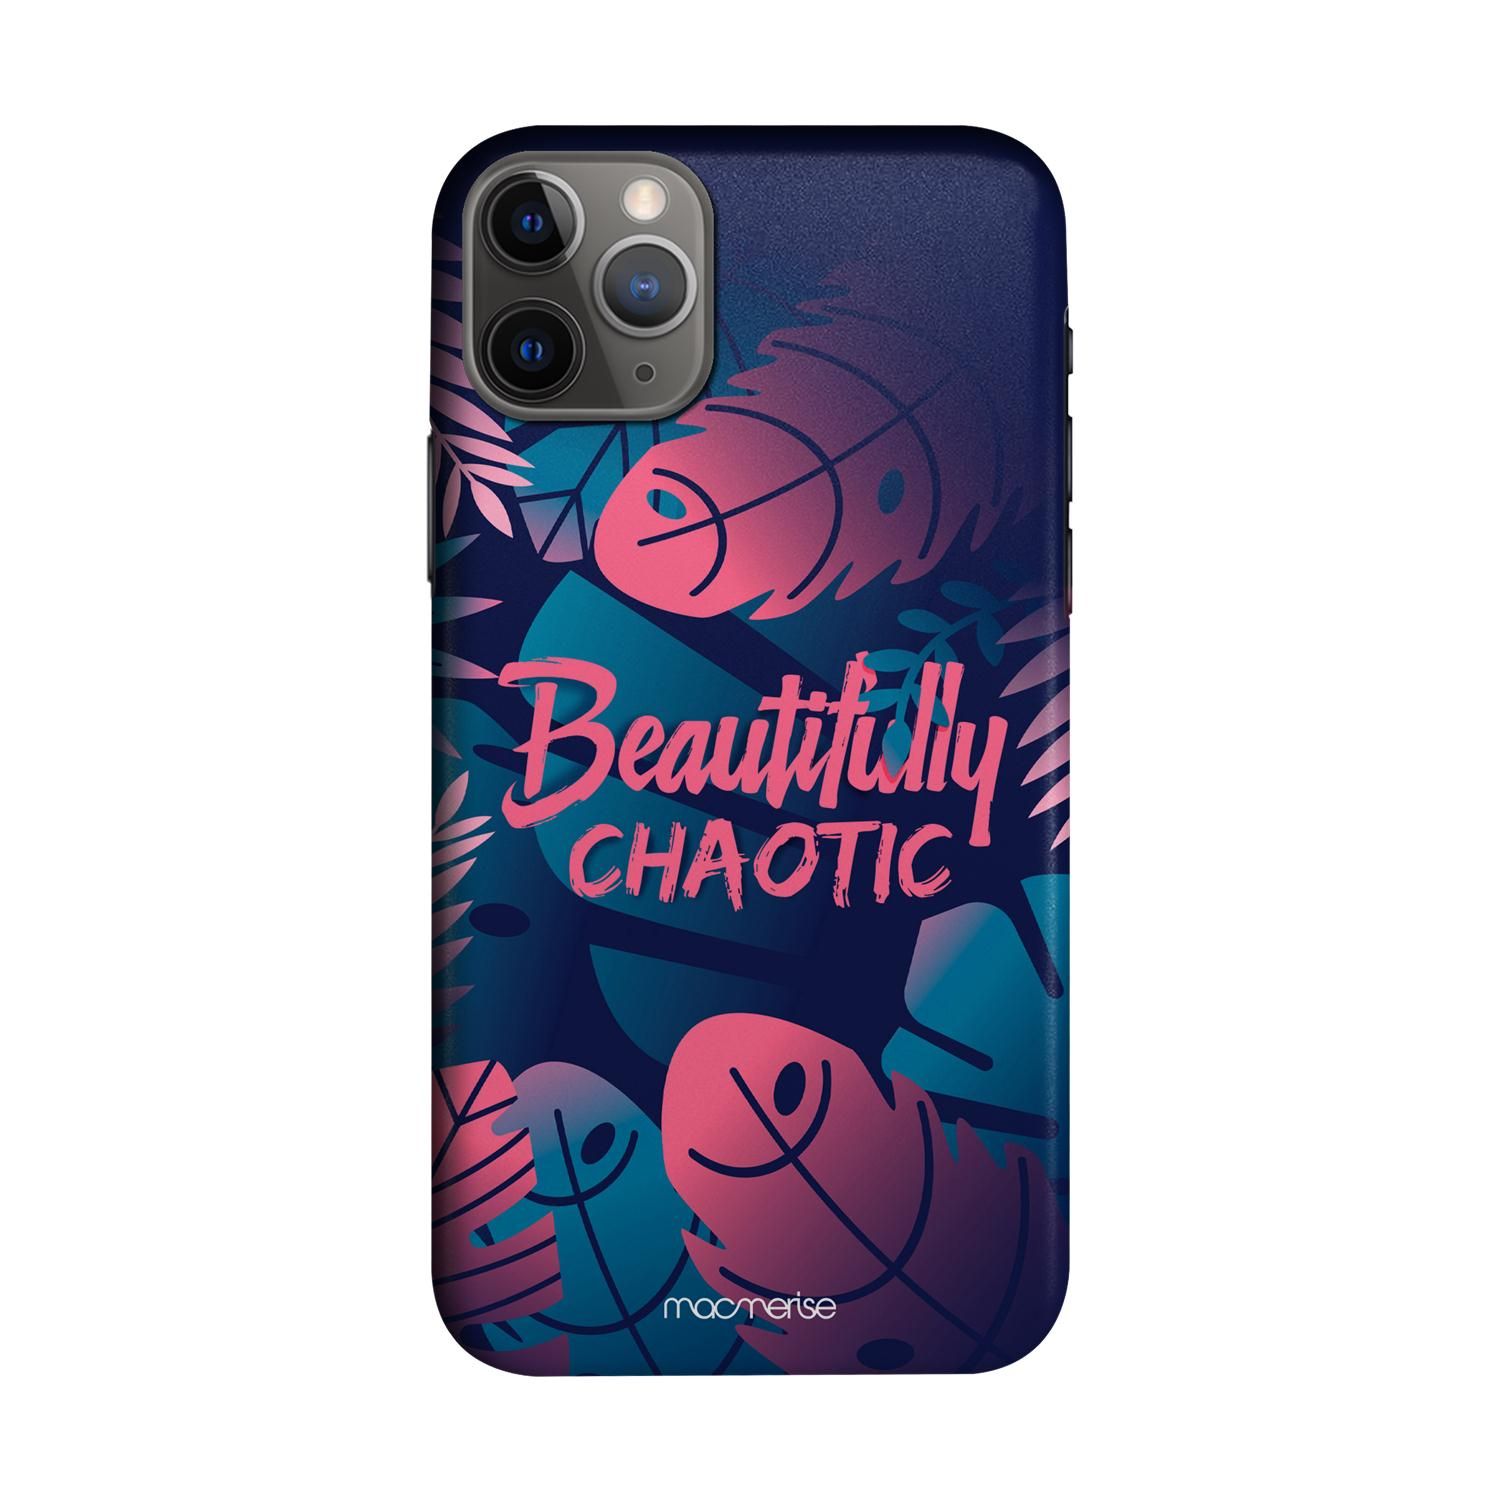 Buy Beautifully Chaotic - Sleek Phone Case for iPhone 11 Pro Max Online